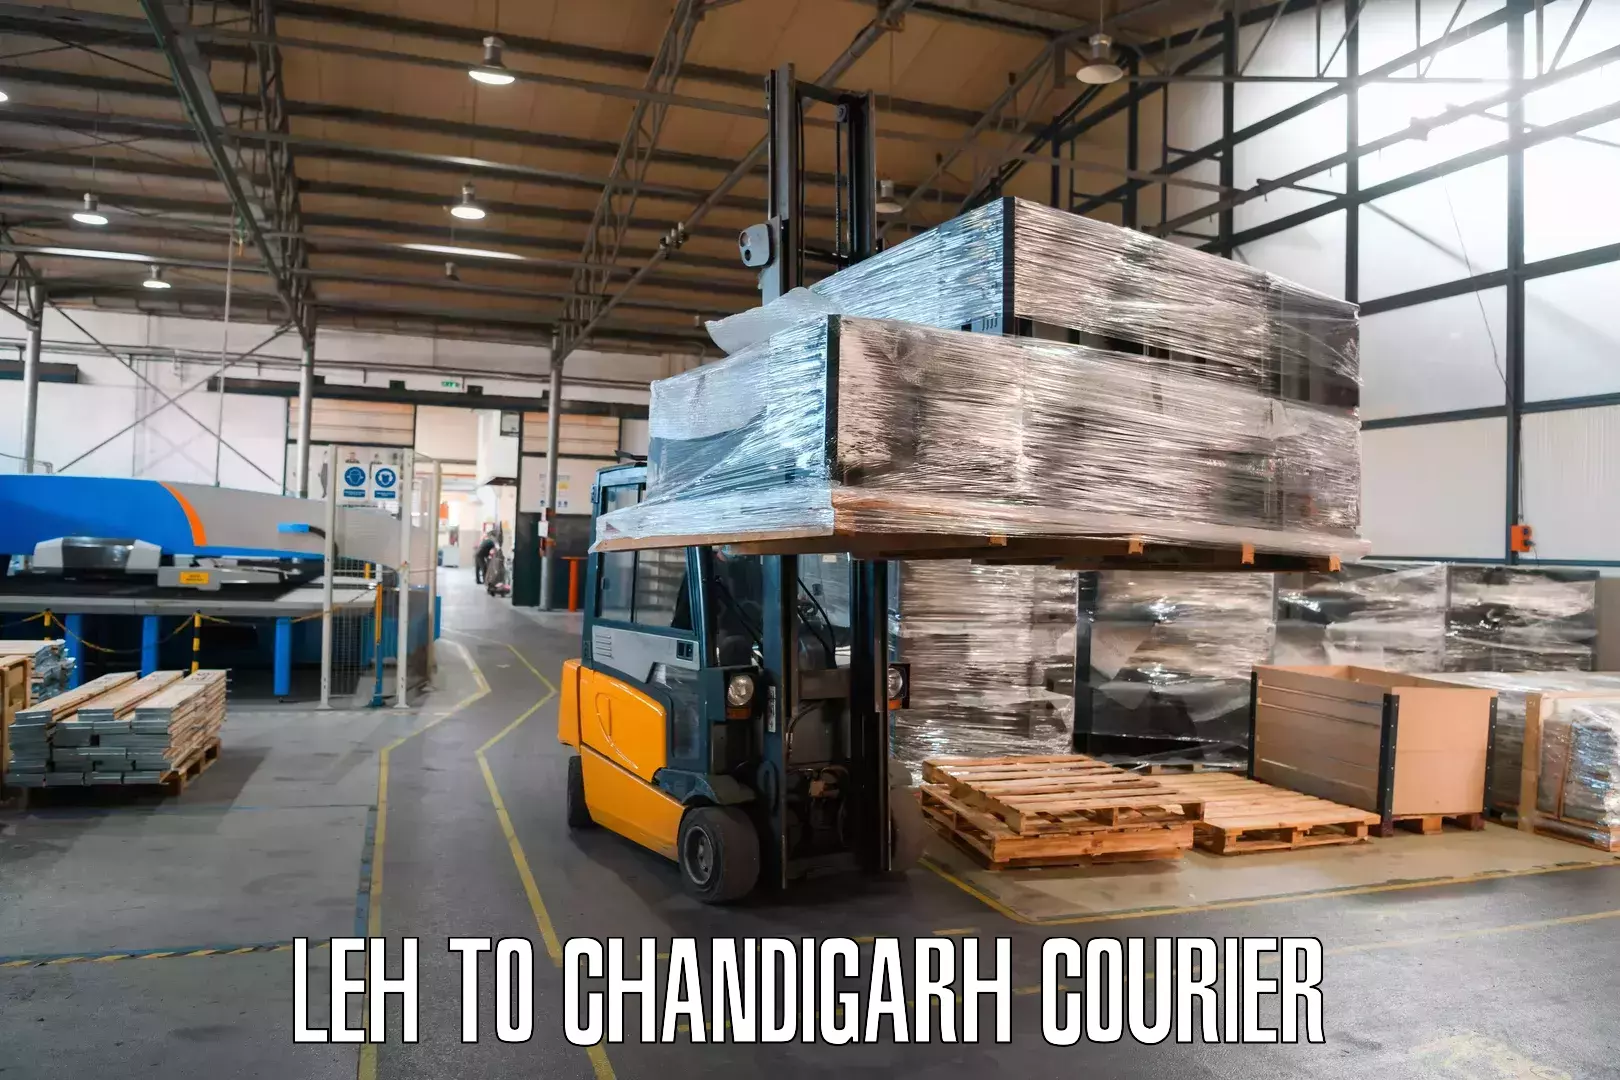 Courier rate comparison Leh to Chandigarh